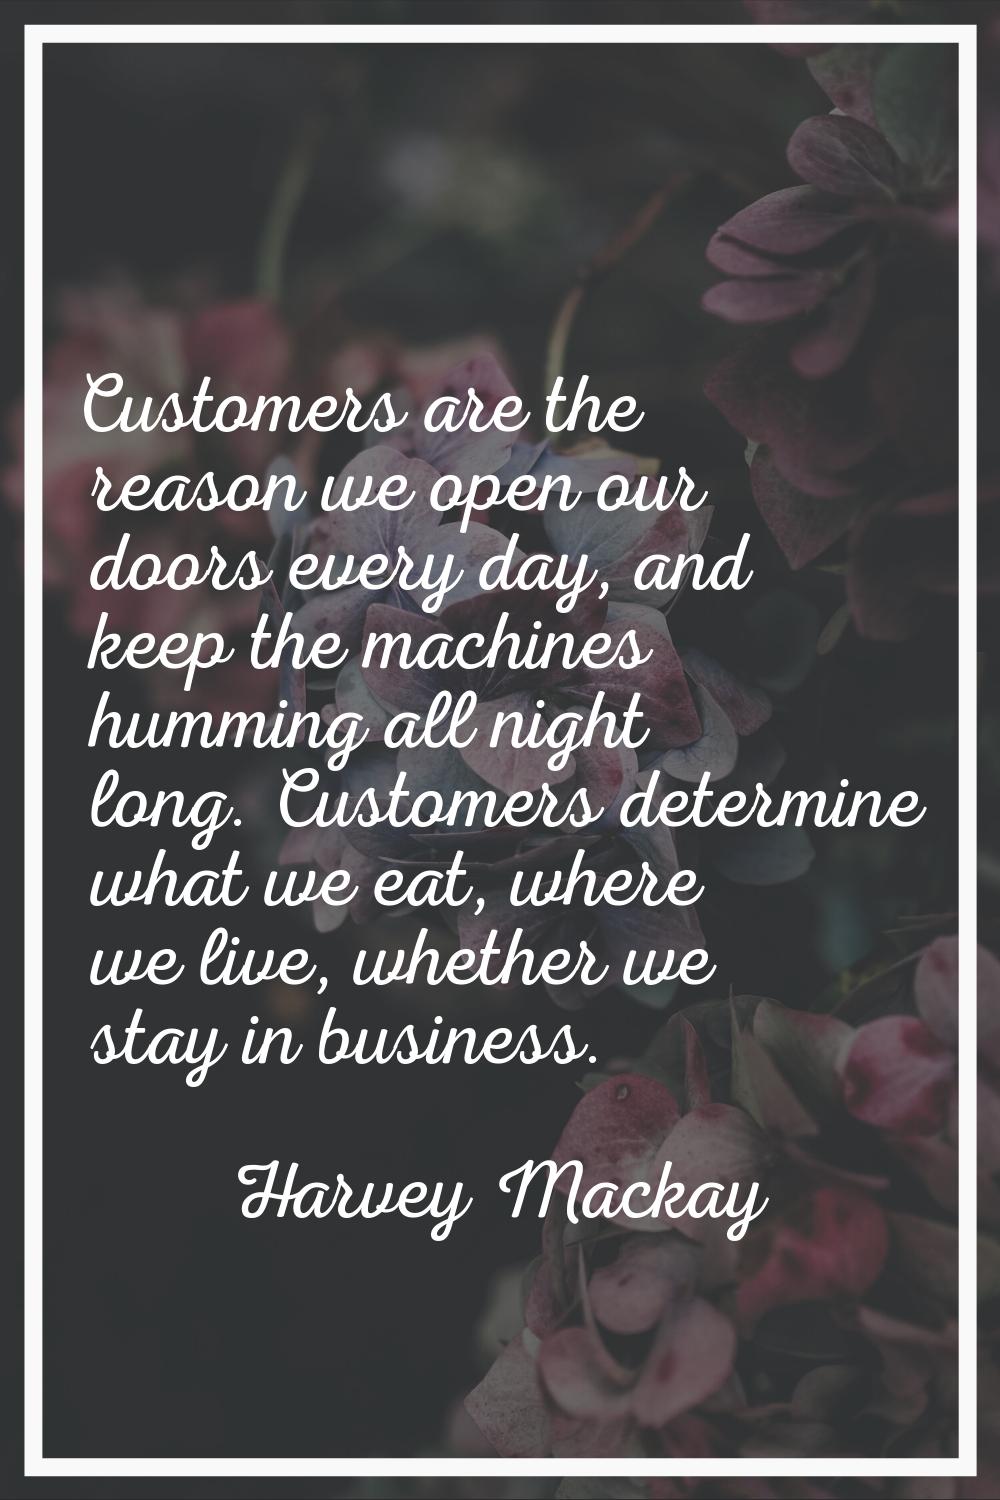 Customers are the reason we open our doors every day, and keep the machines humming all night long.